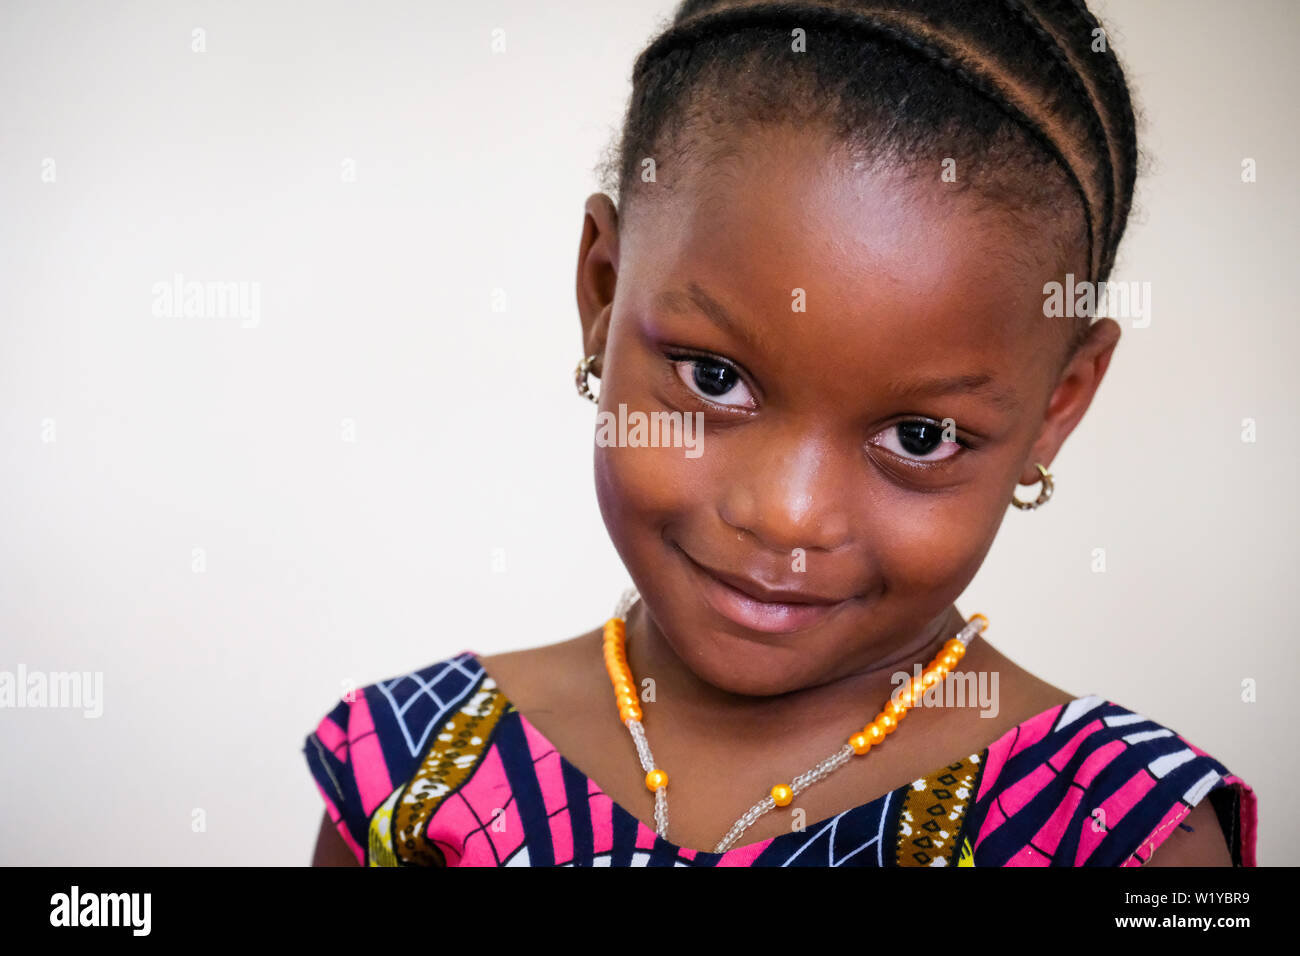 Nicely smiling African girl, 6 years old. Tanzania Stock Photo